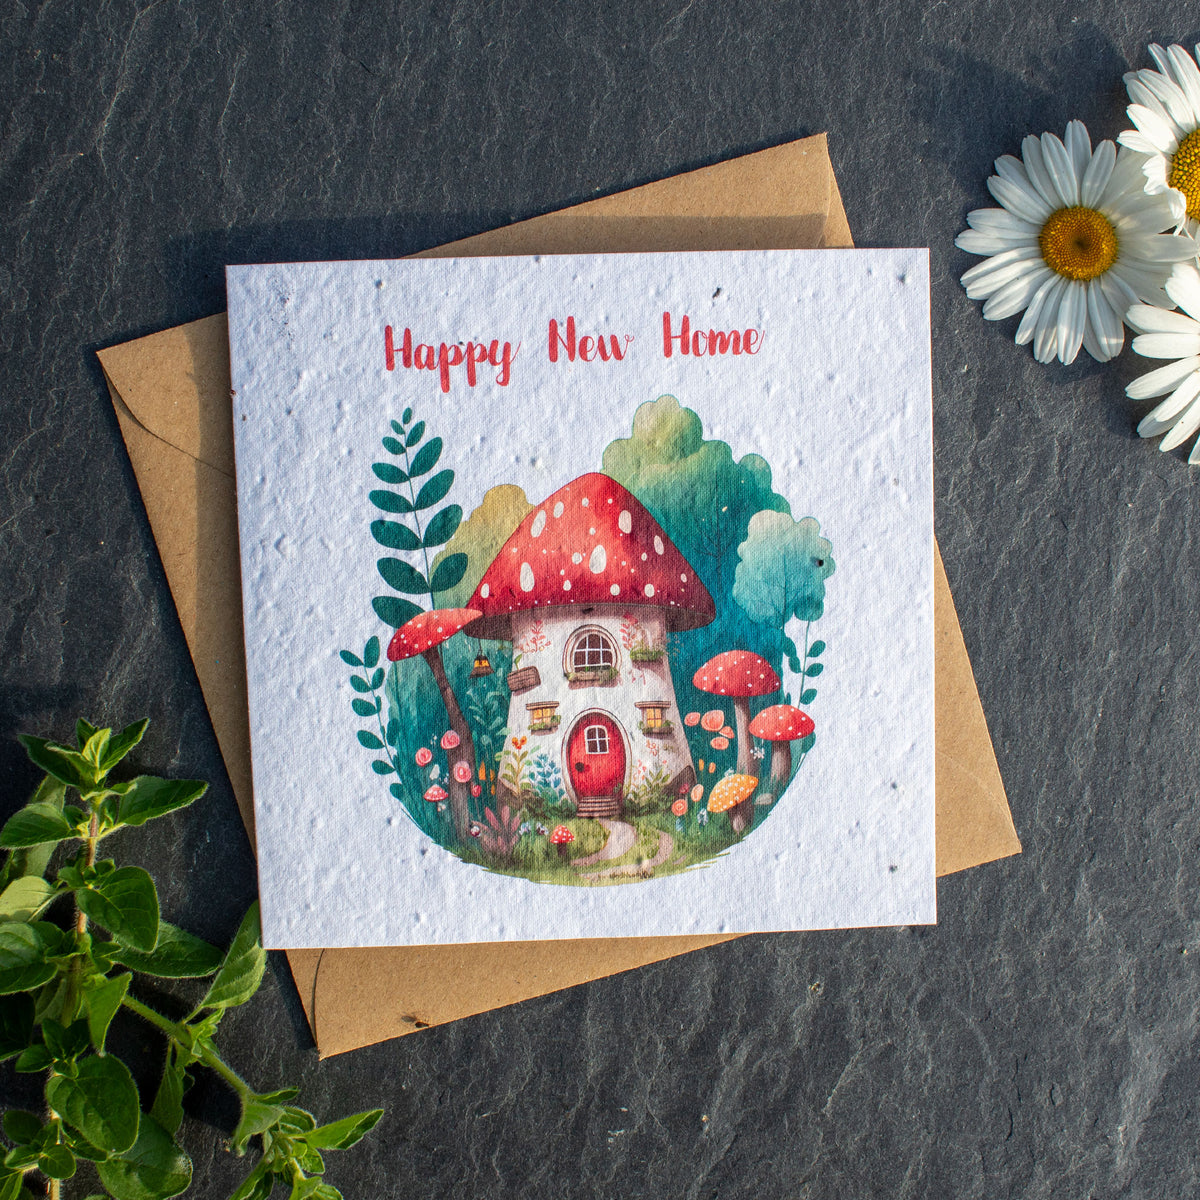 Plantable Greetings Card - Happy New Home